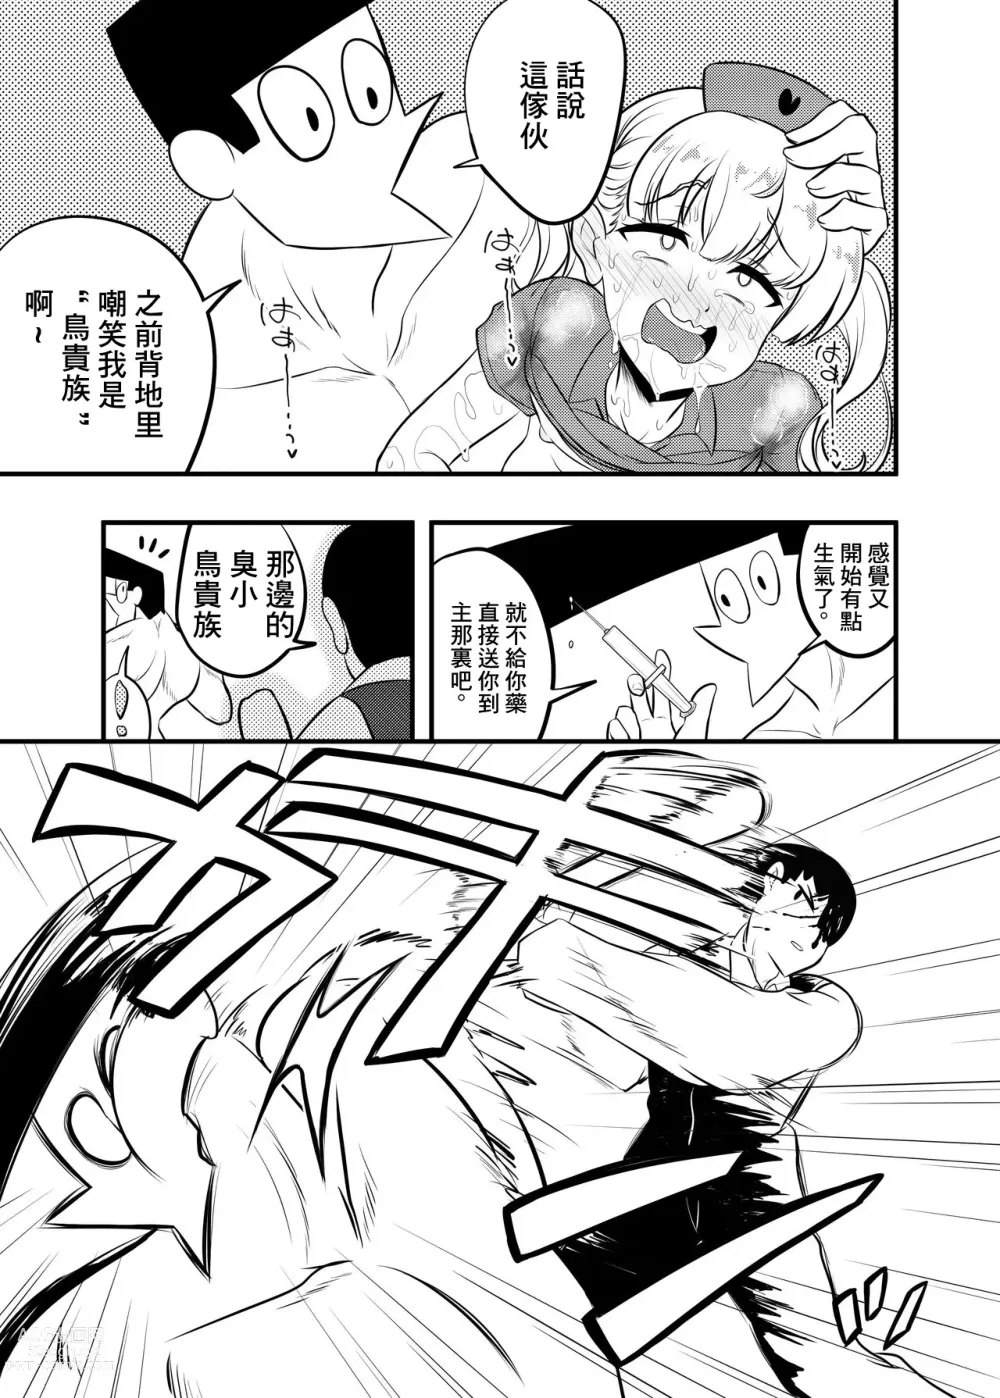 Page 19 of doujinshi Noble Asshole 2